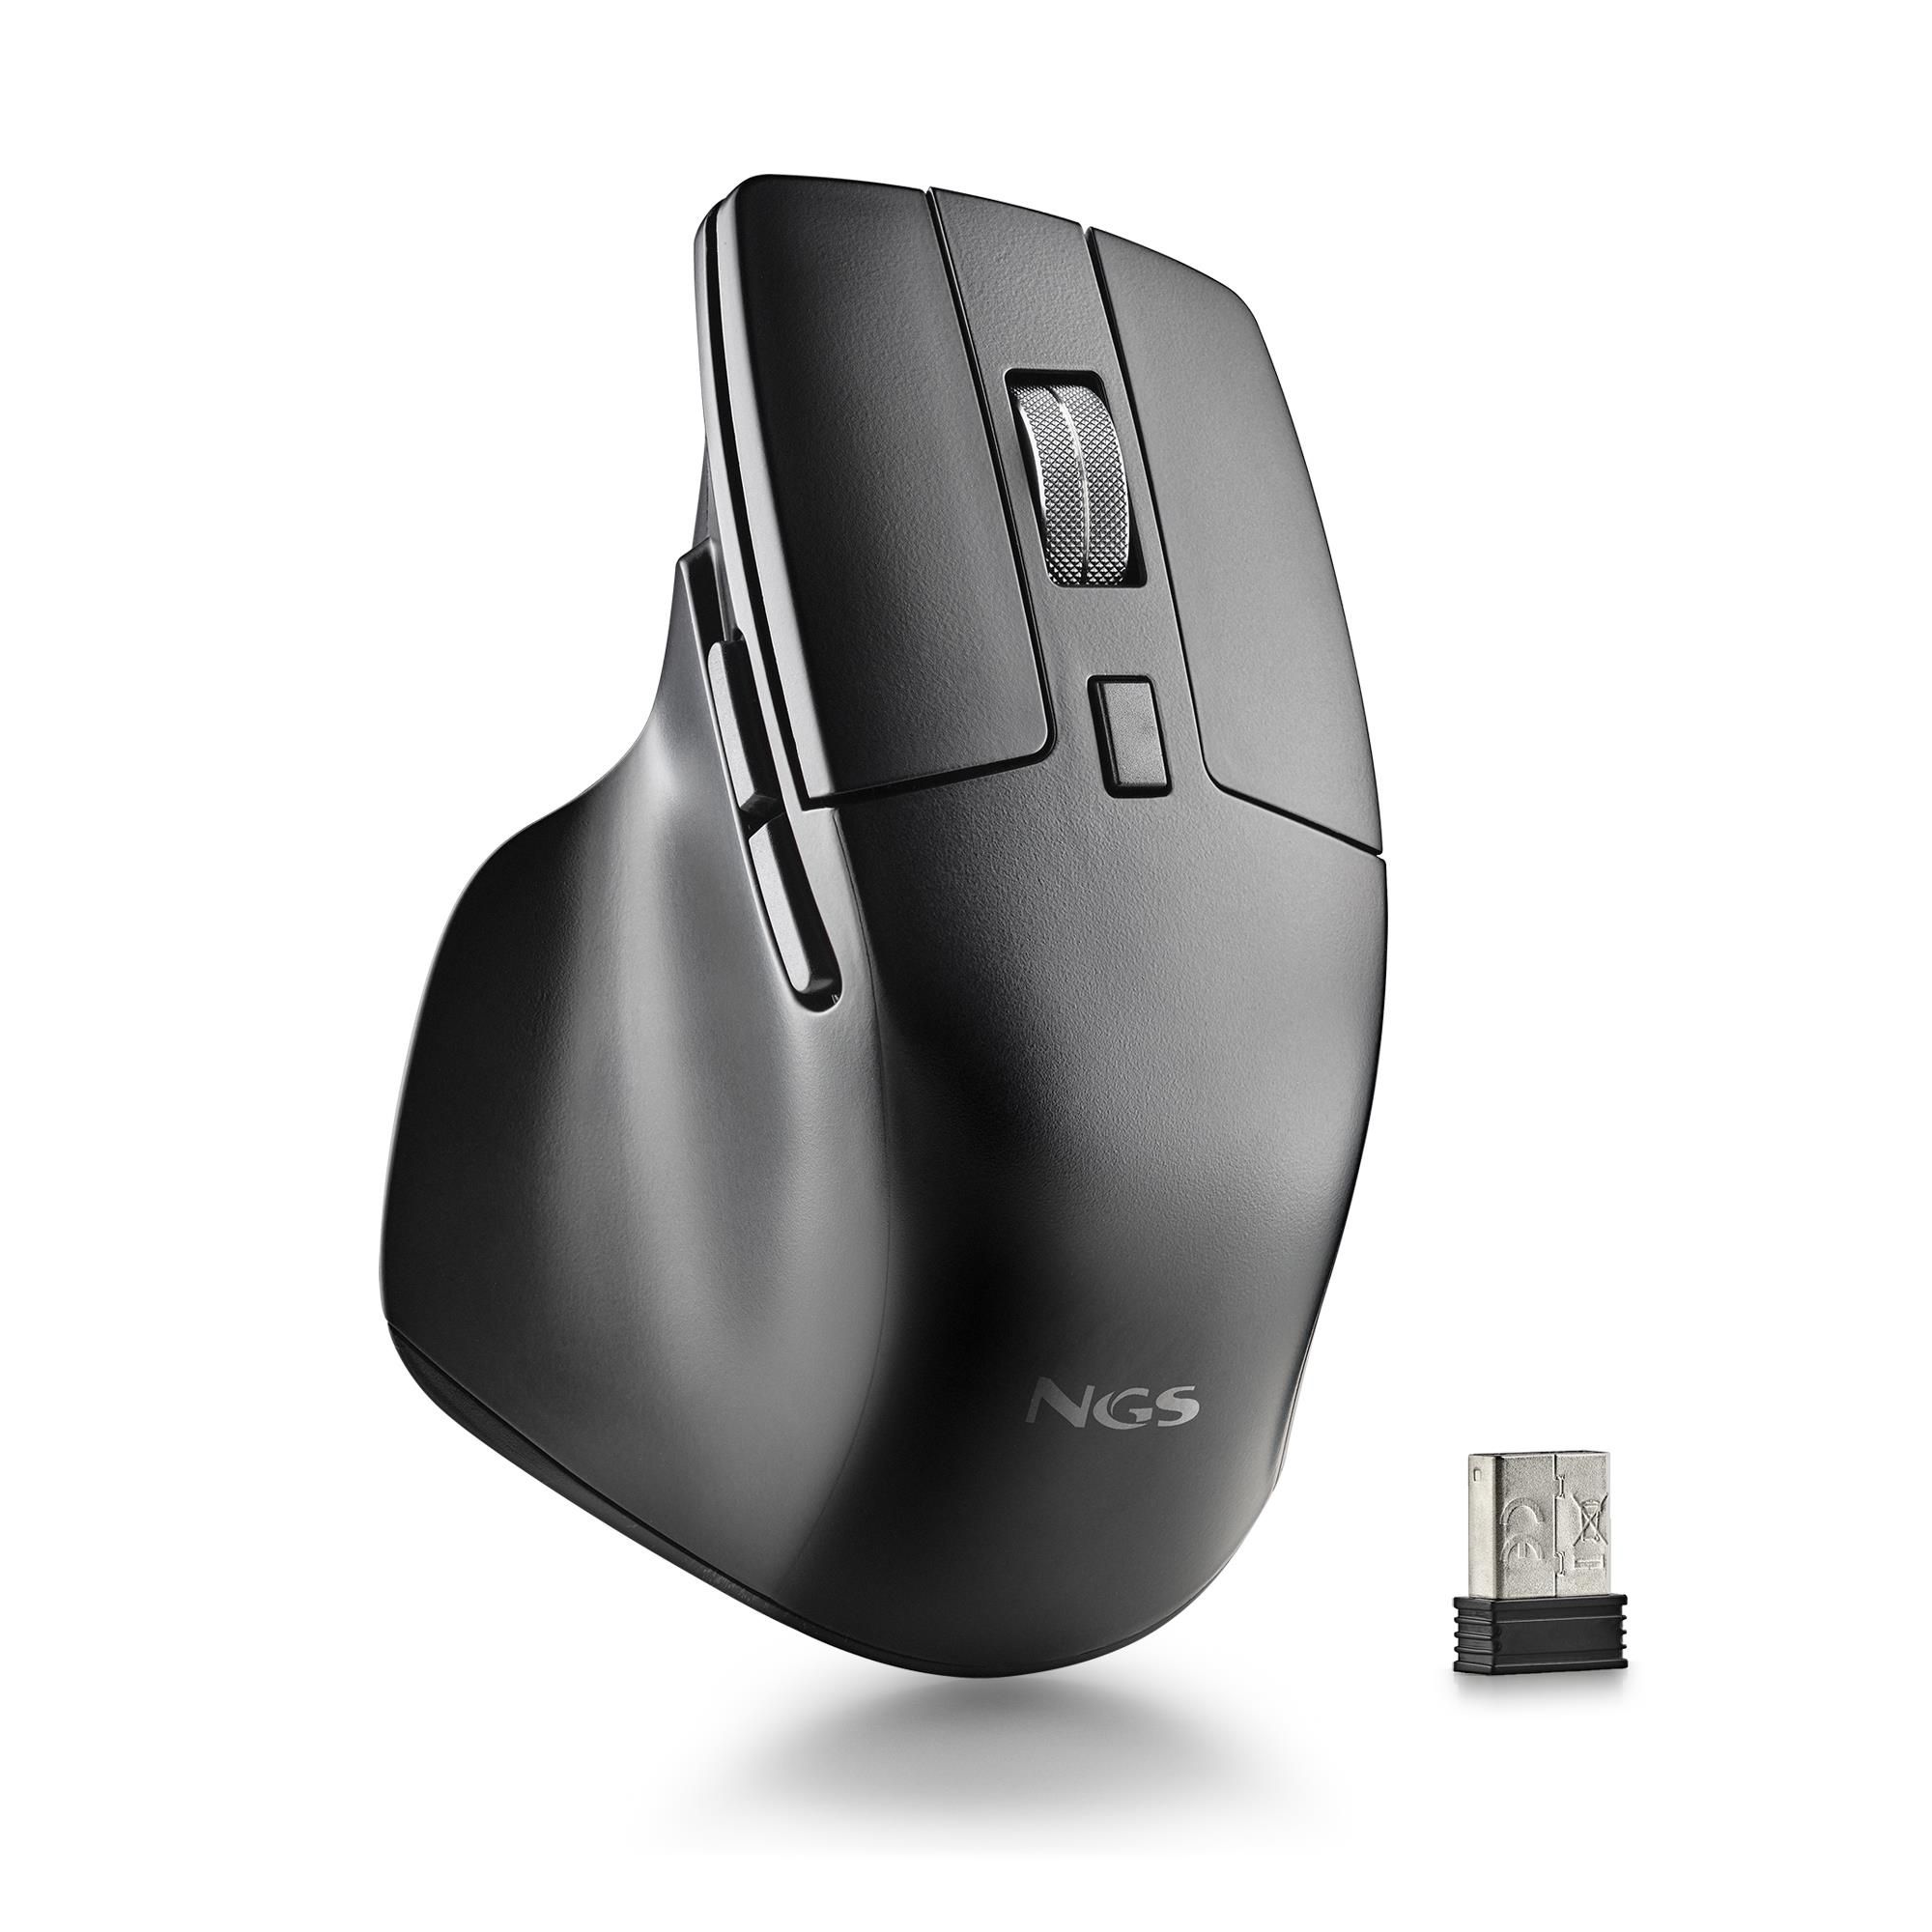 NGS Hit-RB Mouse Mano